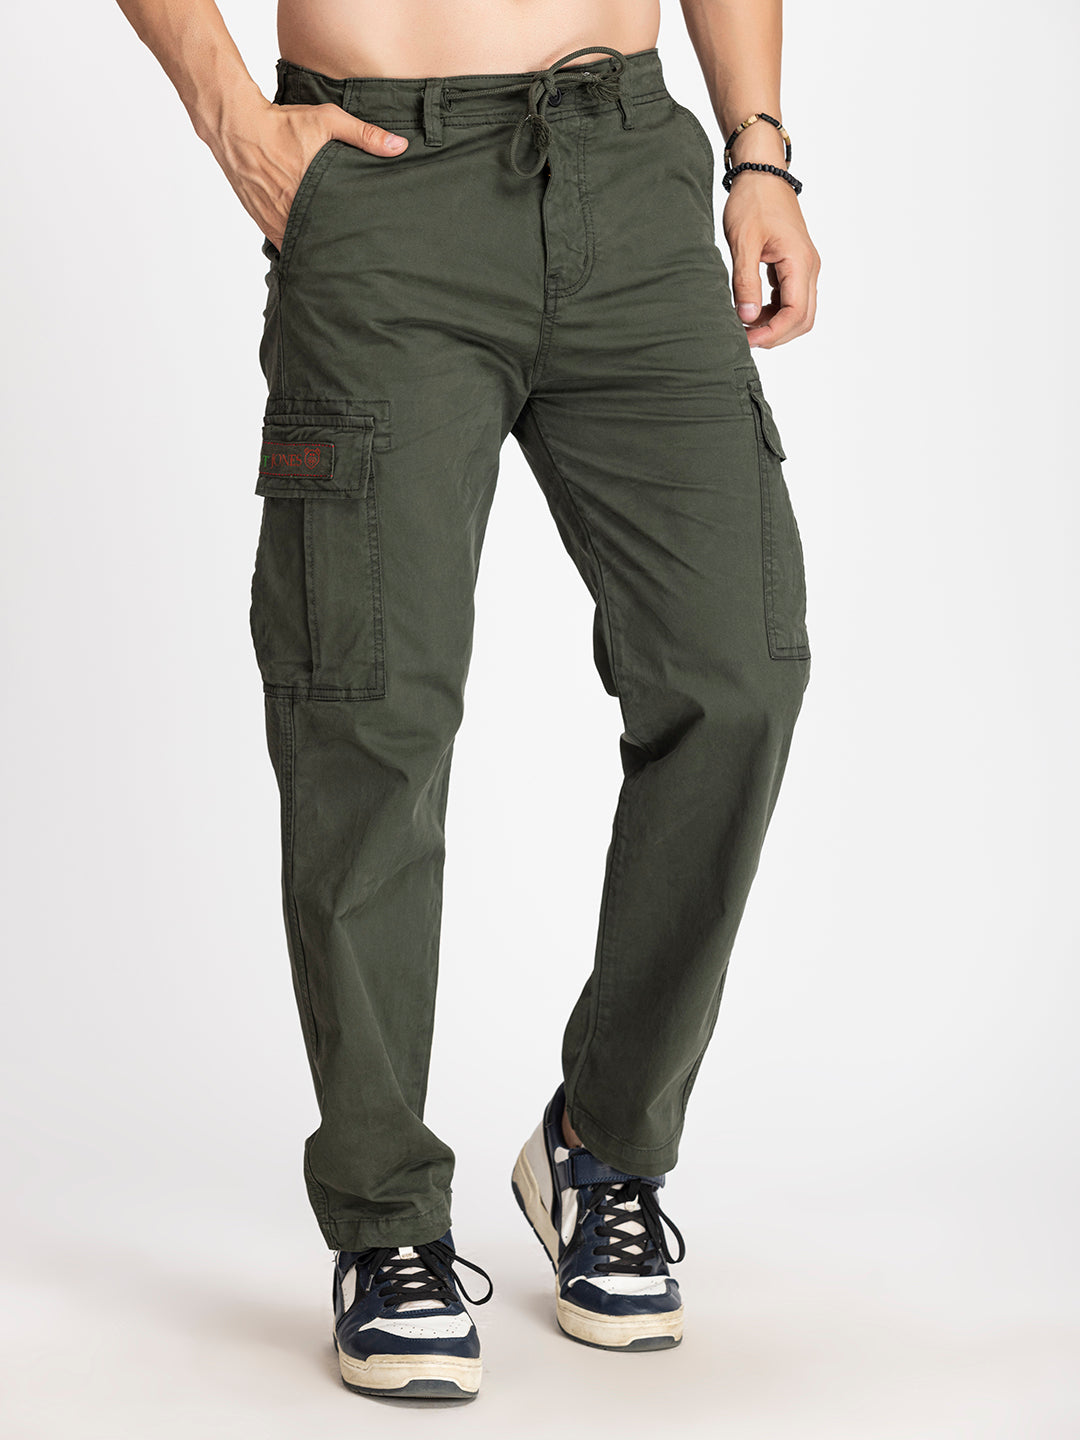 OLIVE GREEN COTTON UNIVERSE CARGO